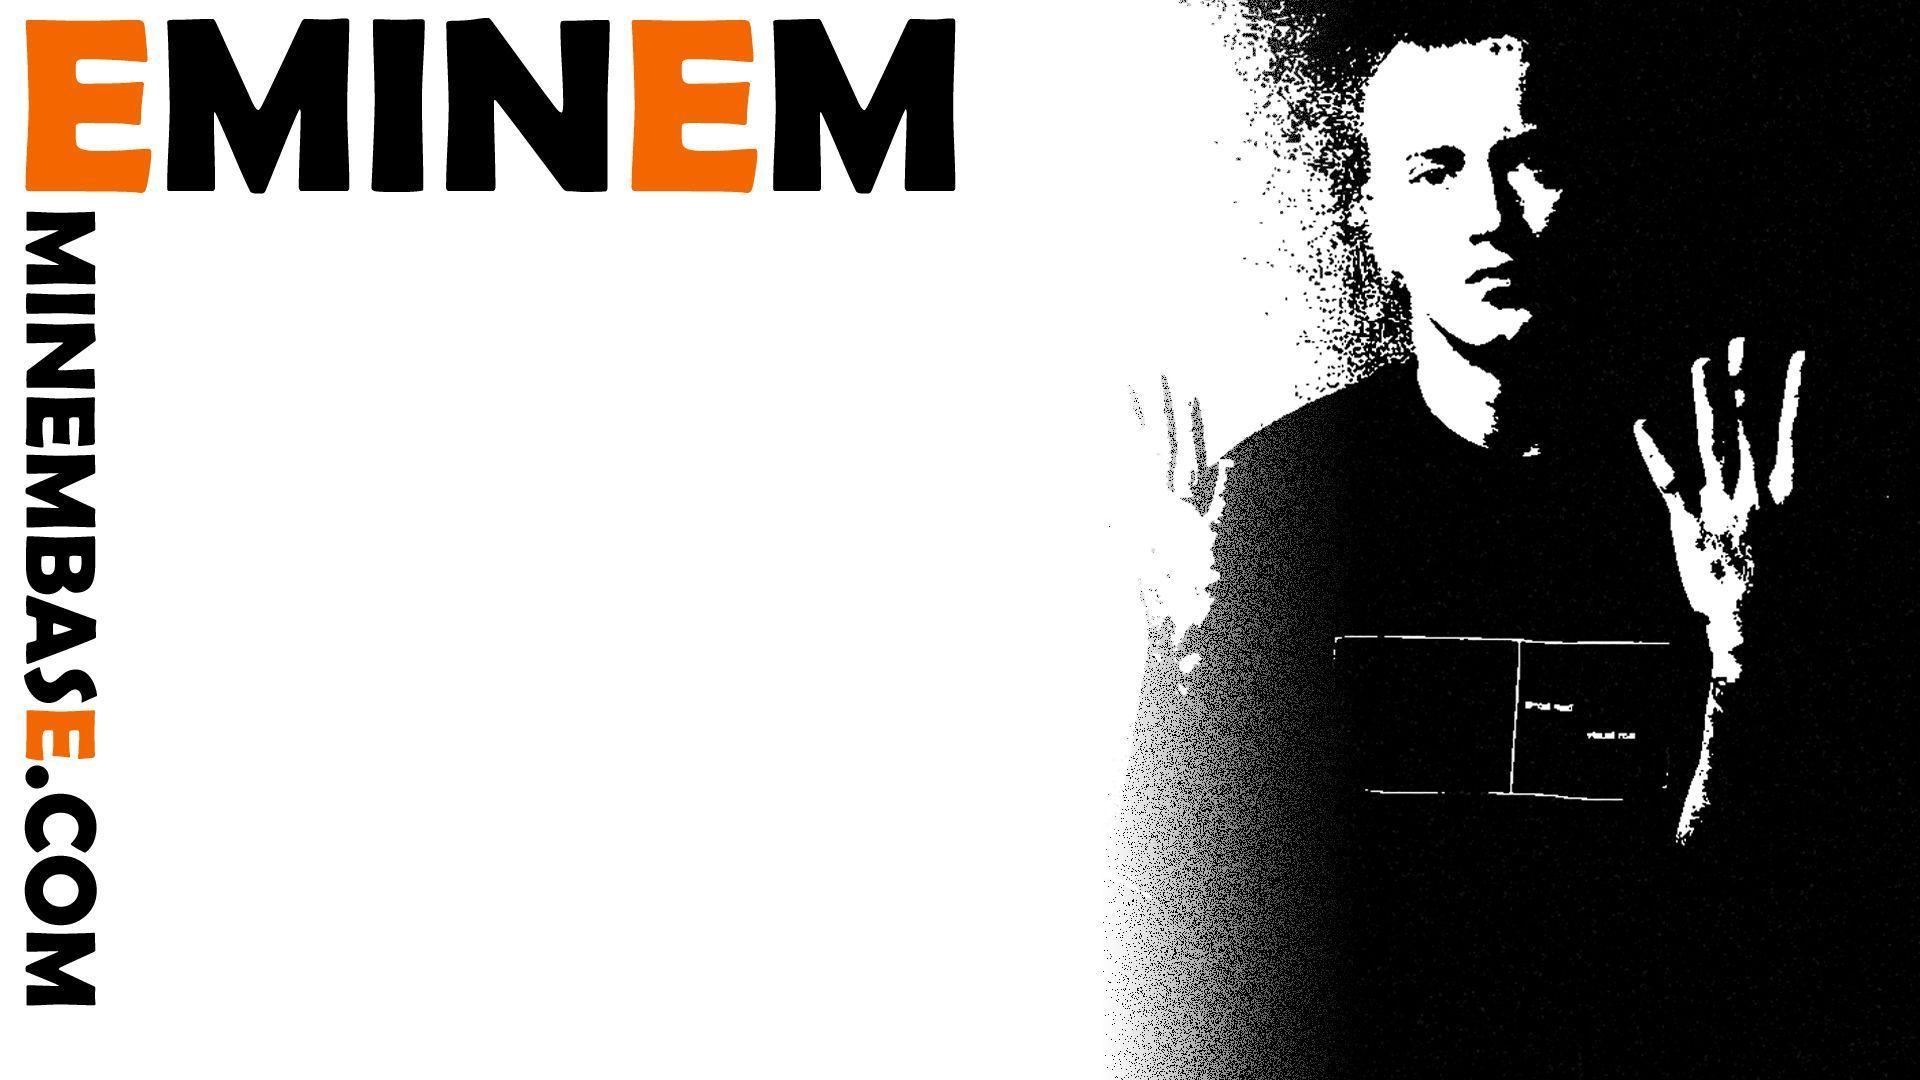 eminem wallpaper HD 4 - Image And Wallpaper free to